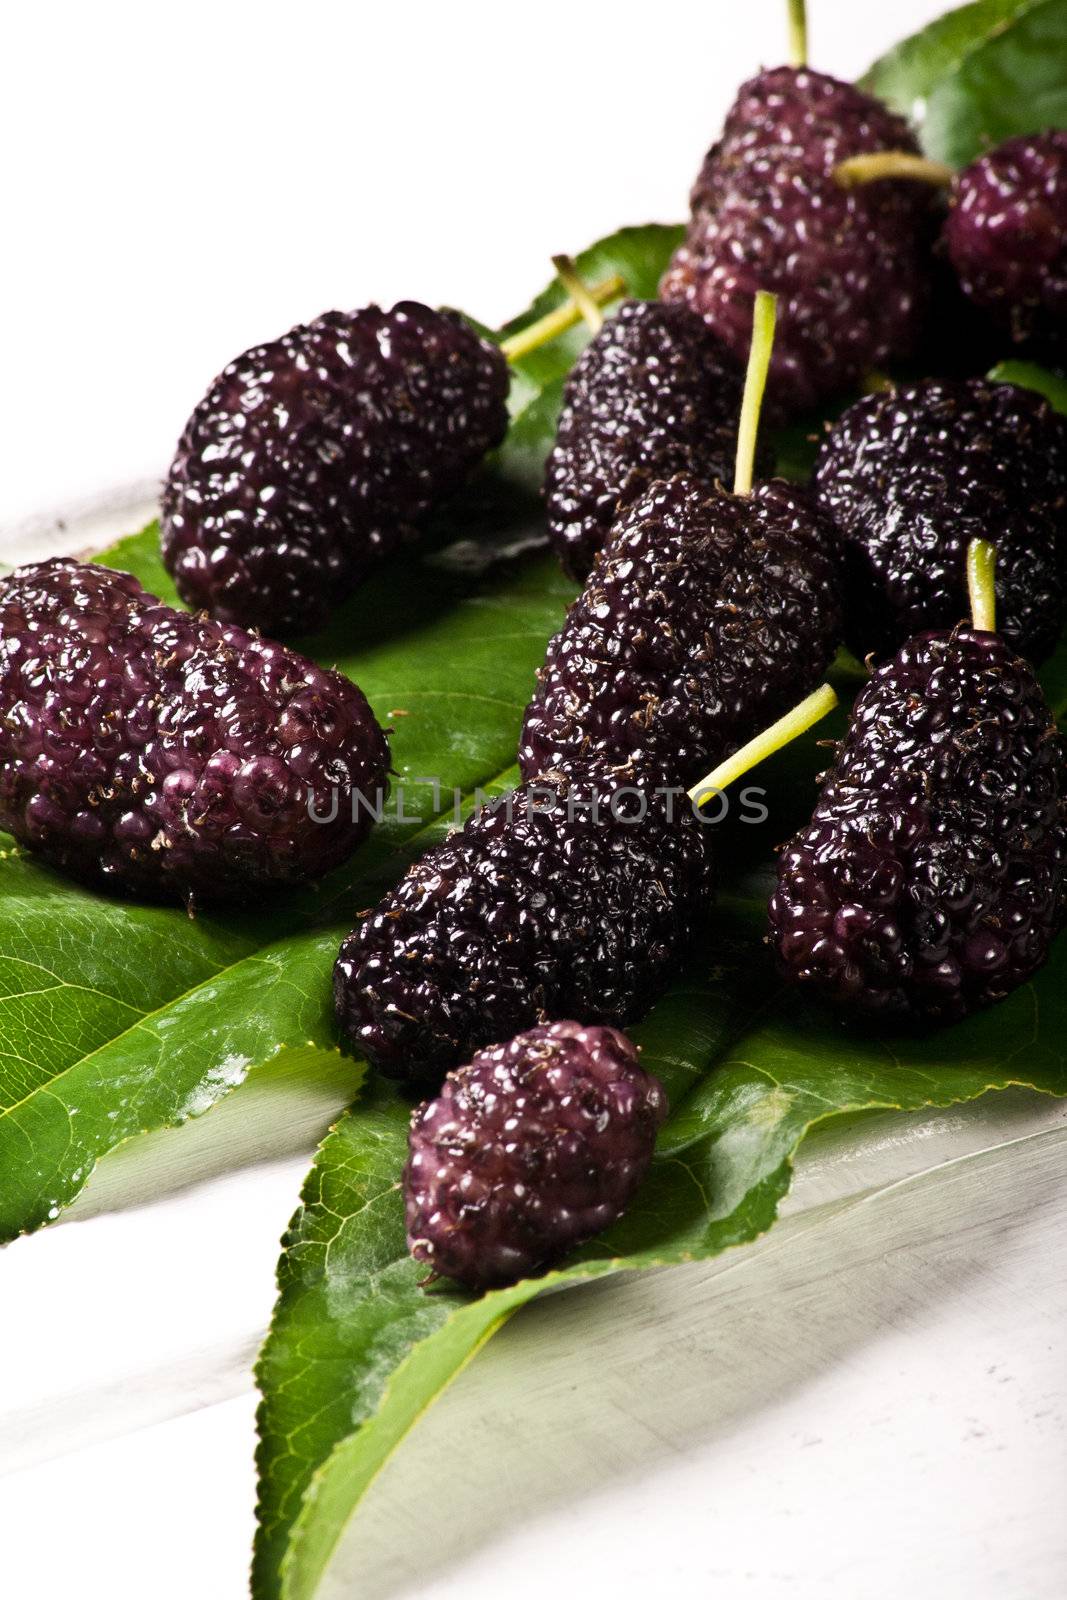 mulberries by maxg71